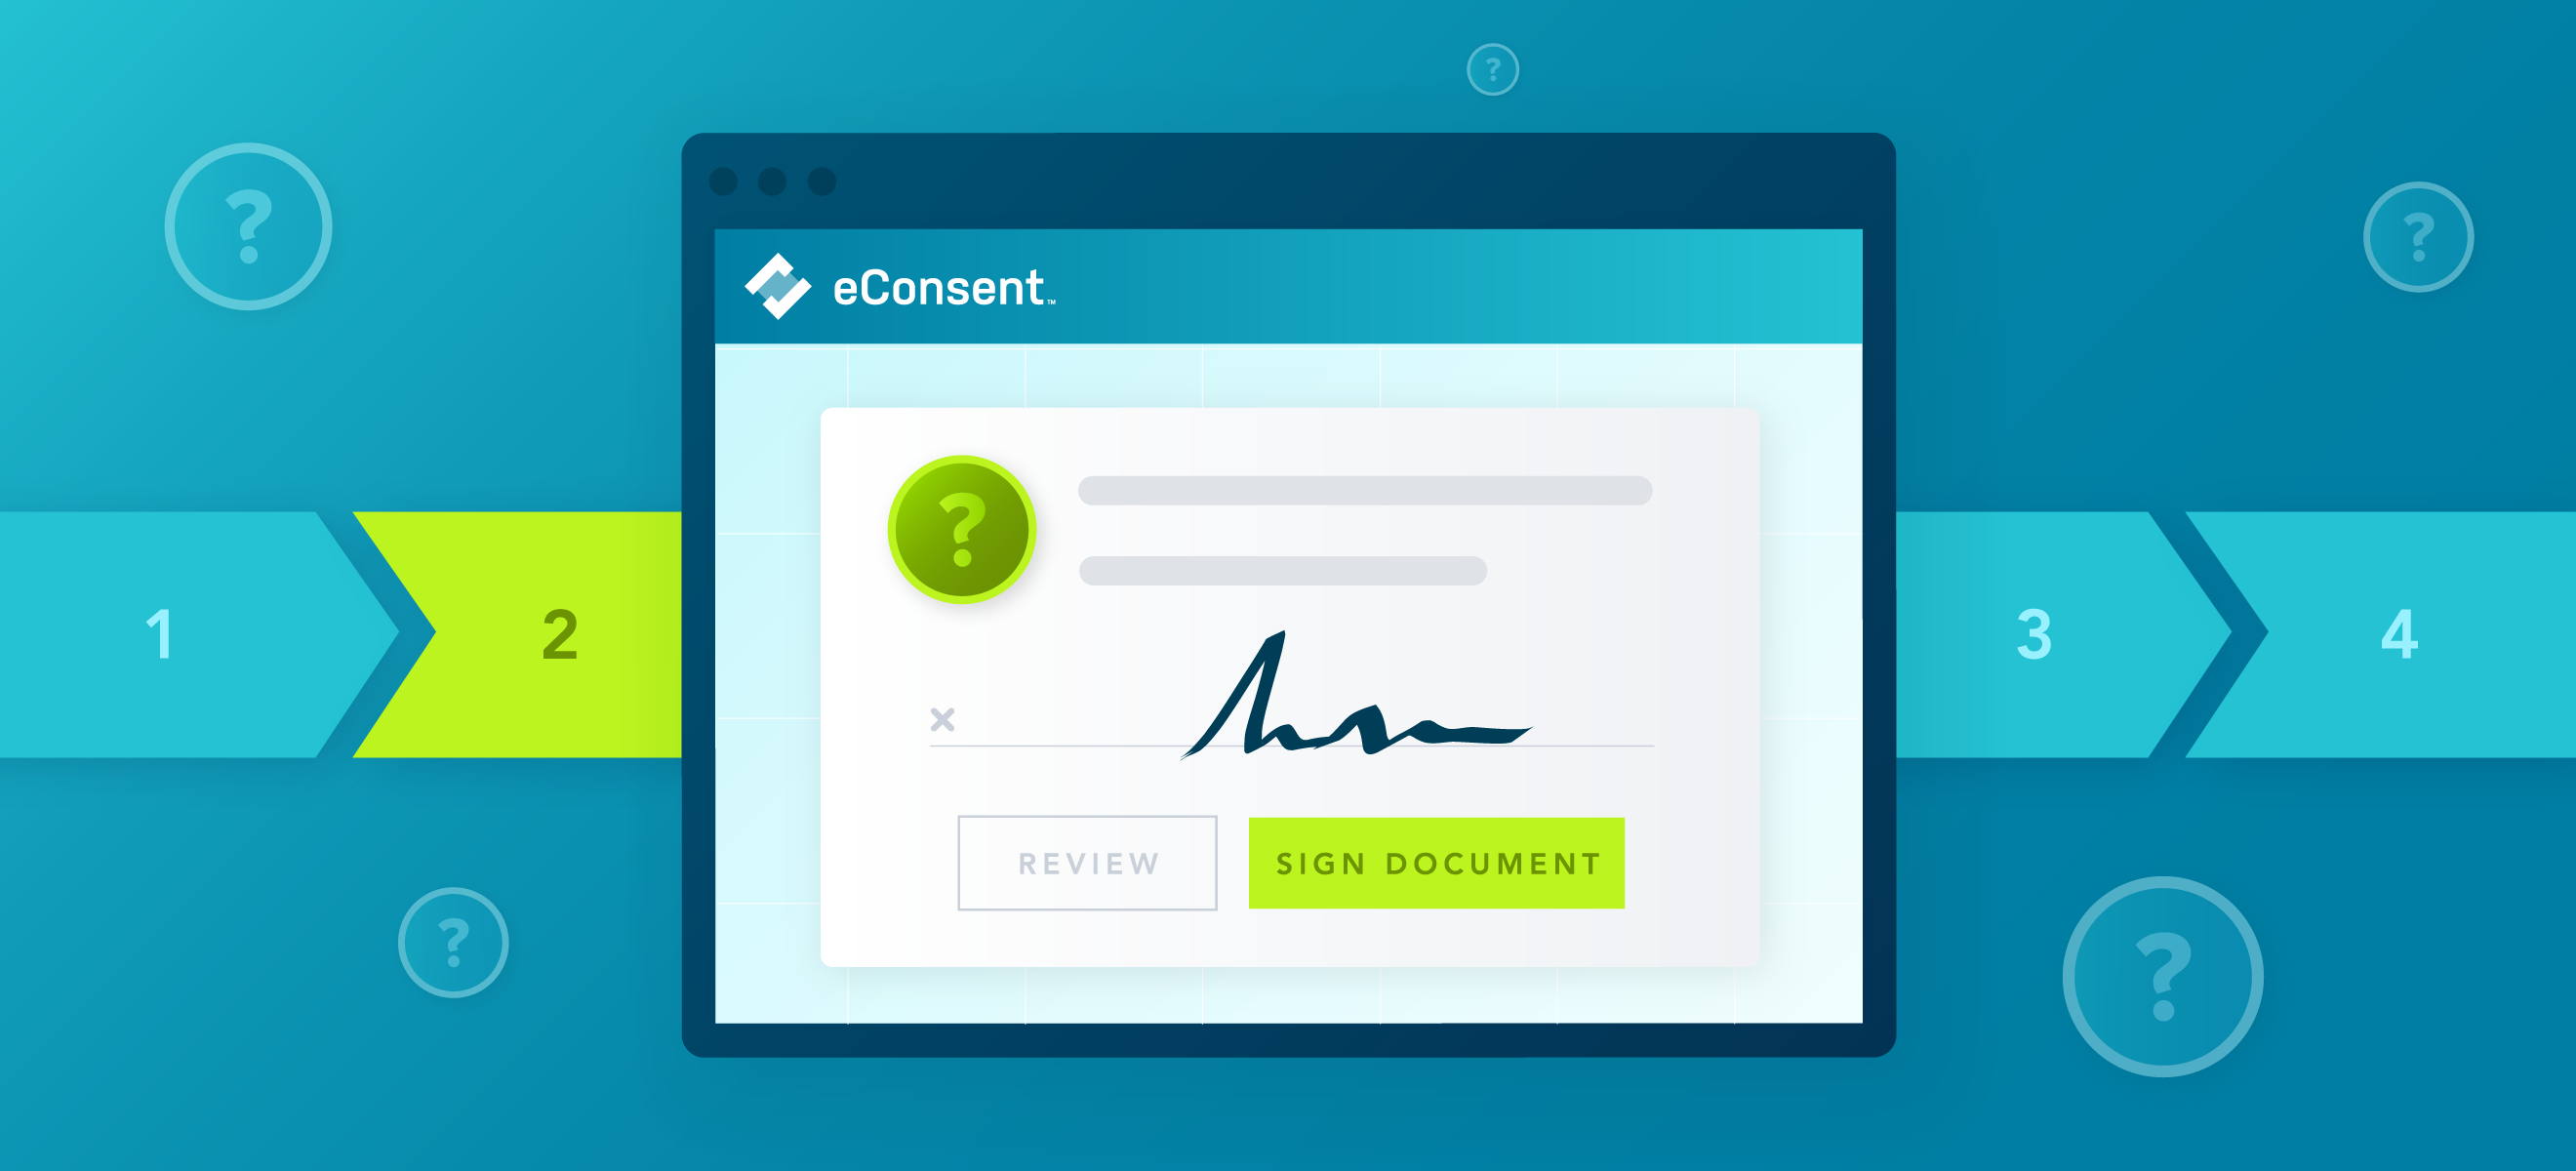 Advarra eConsent demo request - electronic consenting system for clinical trials